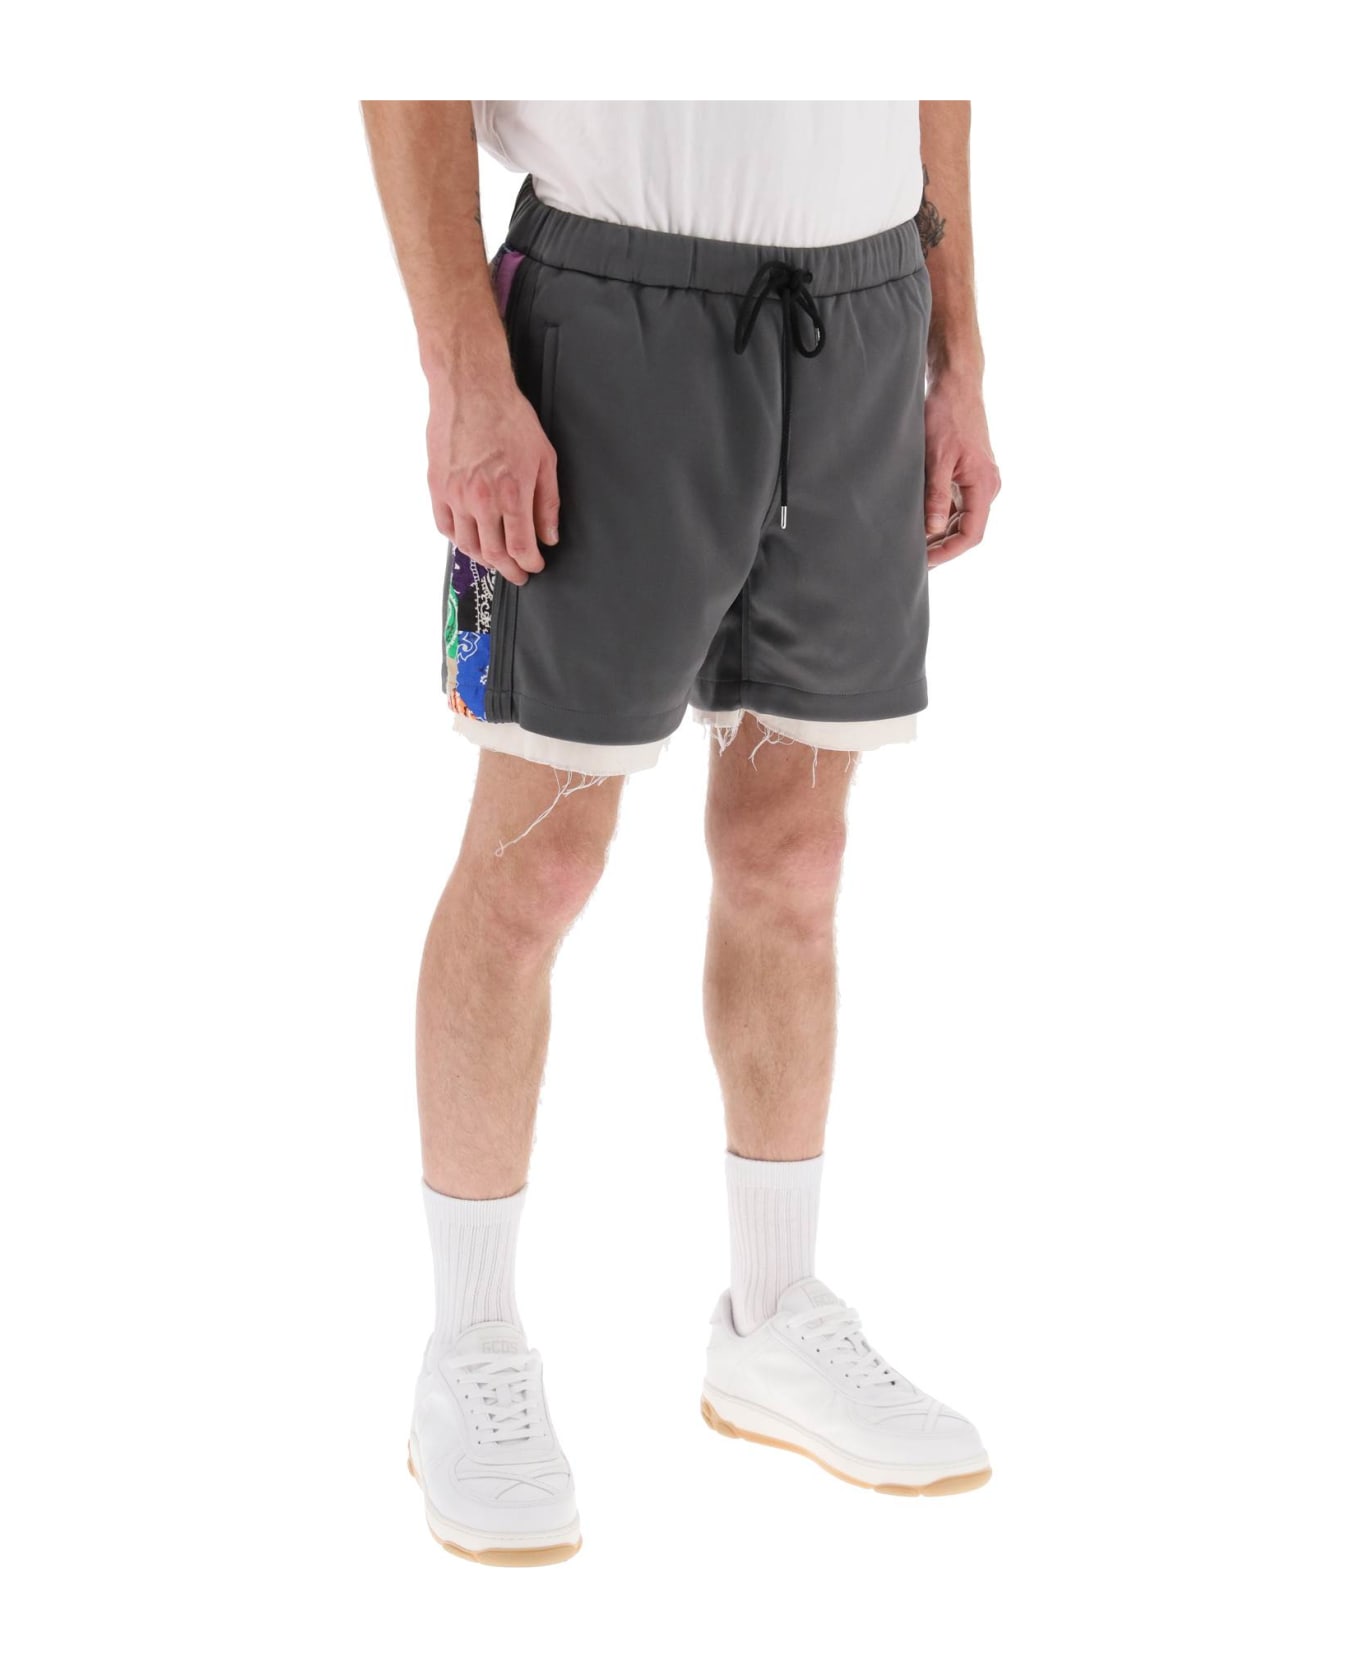 Children of the Discordance Jersey Shorts With Bandana Bands - GRAY (Grey) ショートパンツ